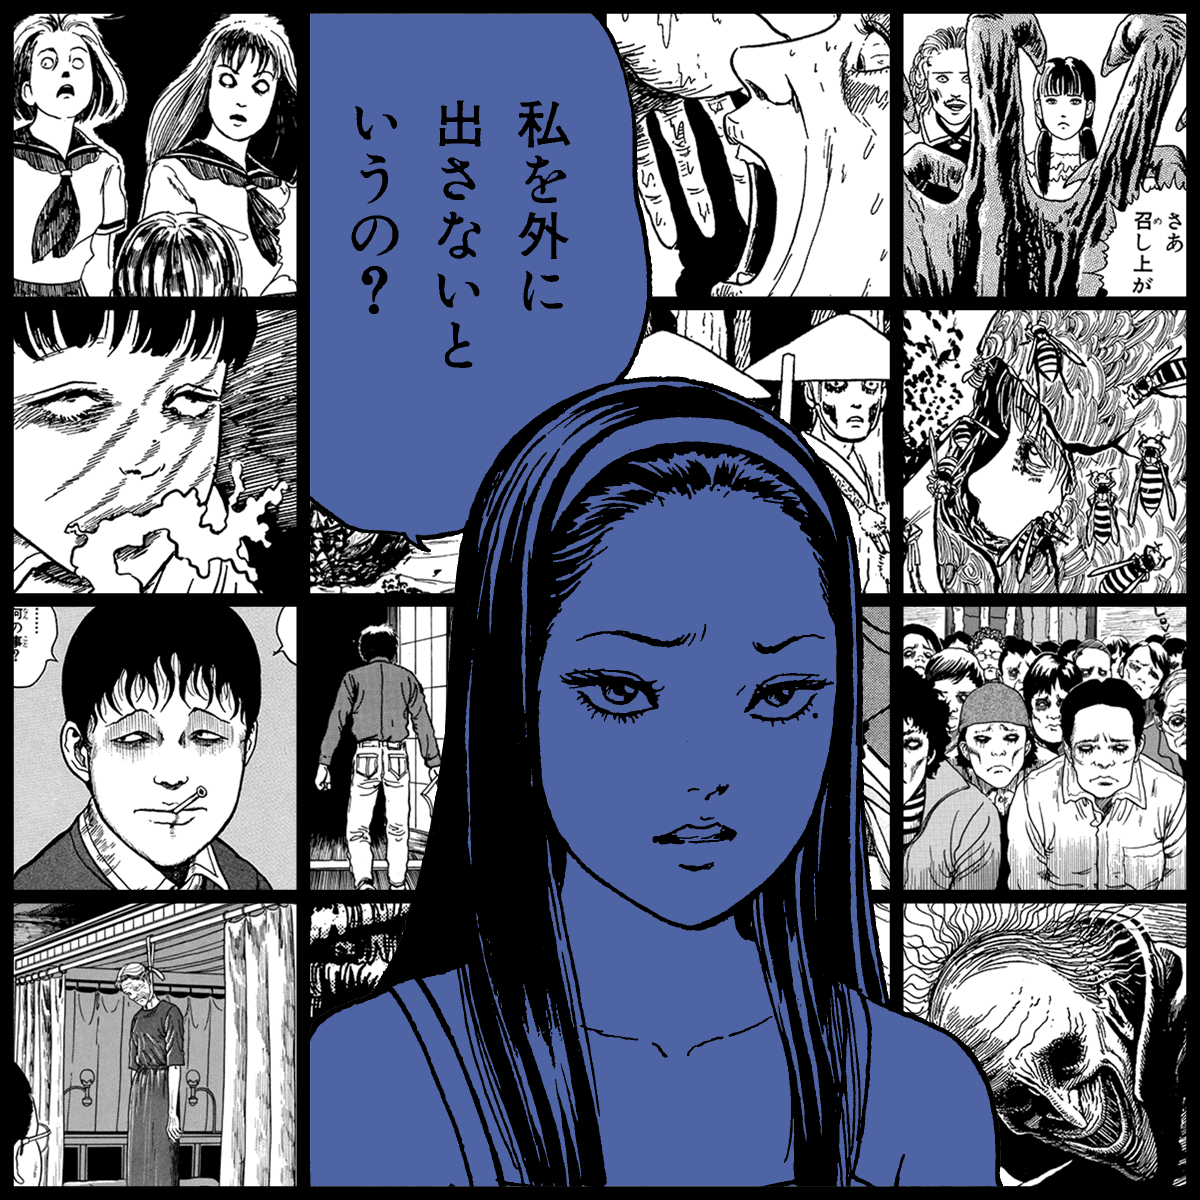 TOMIE by Junji Ito #1730